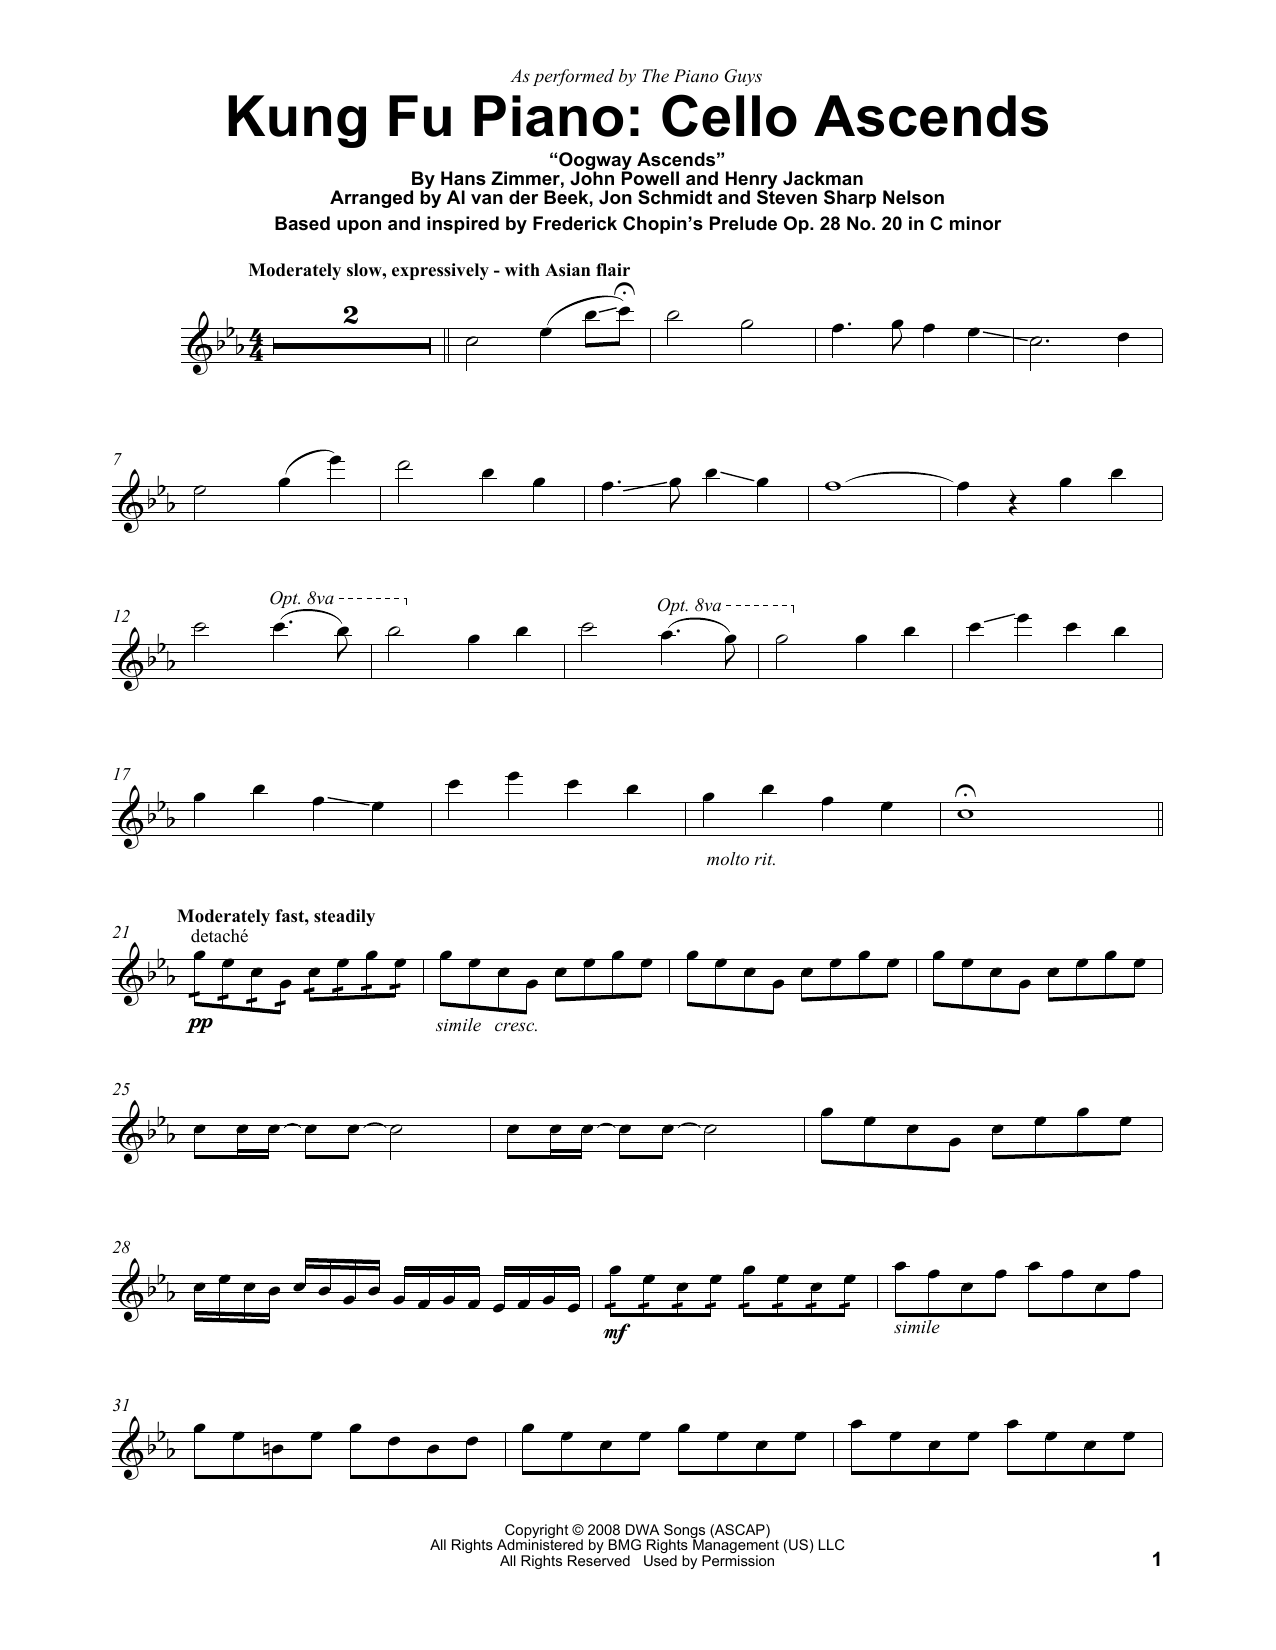 Download The Piano Guys Kung Fu Piano: Cello Ascends Sheet Music